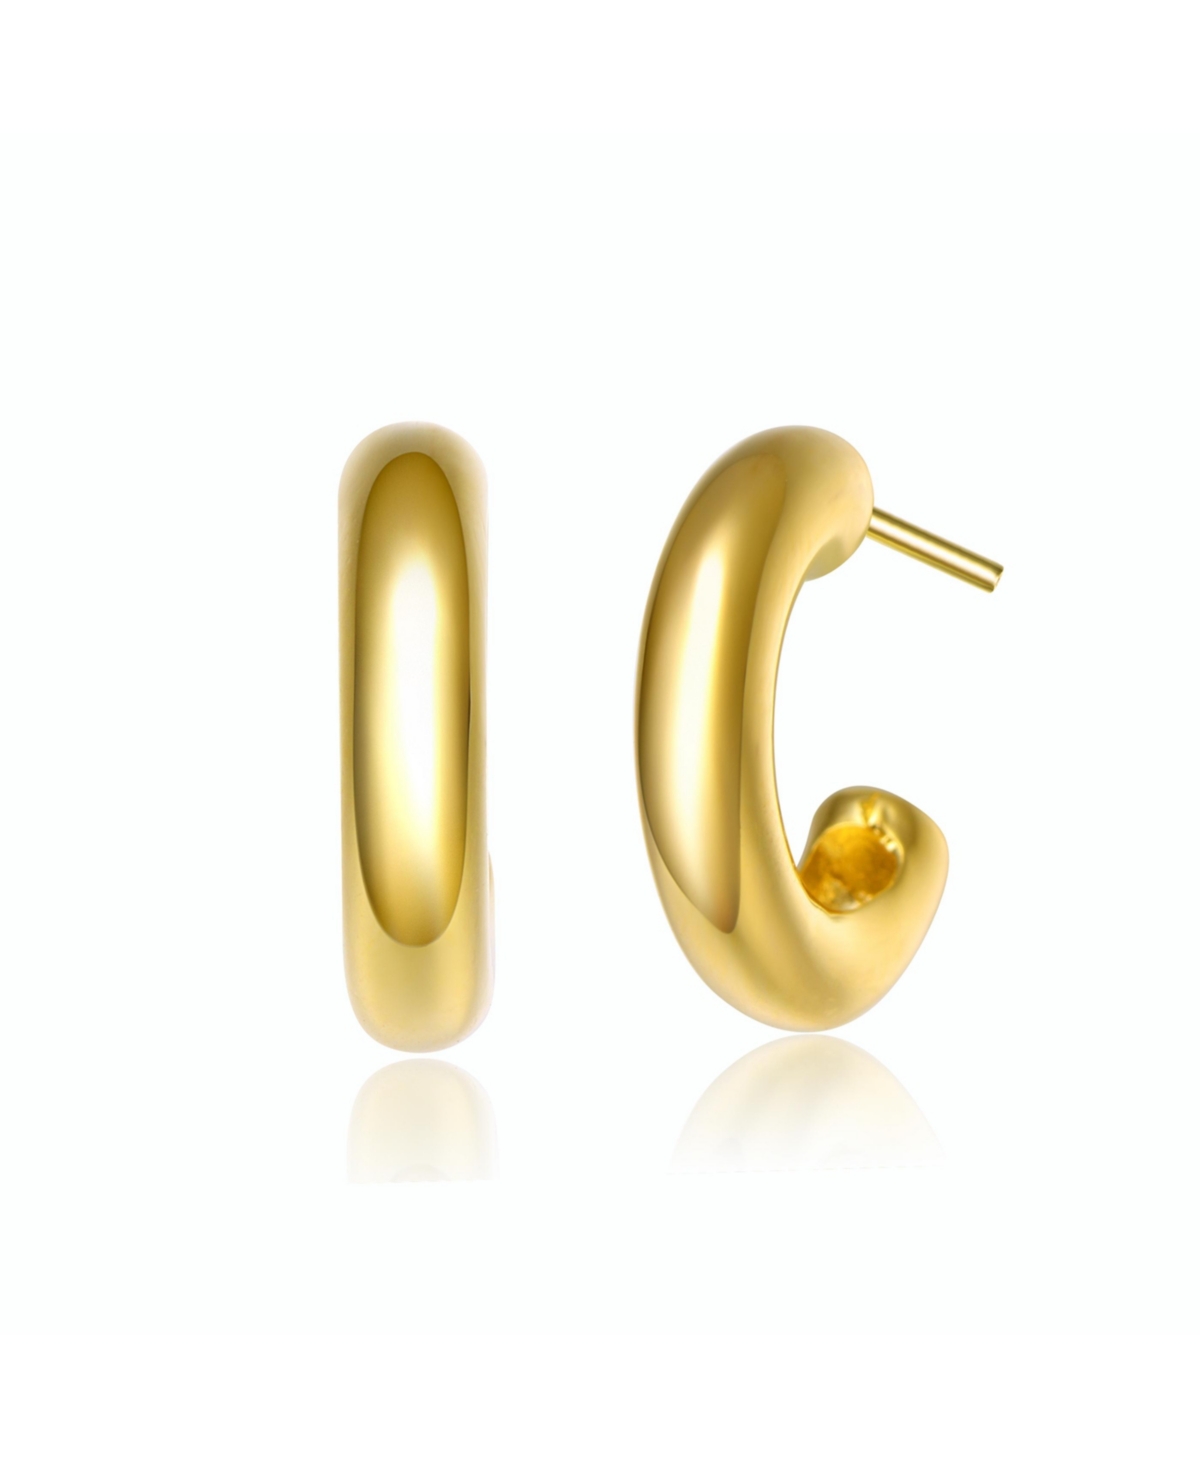 Teens/Young Adults 14K Gold Plated Small Open Hoop Earrings - Gold